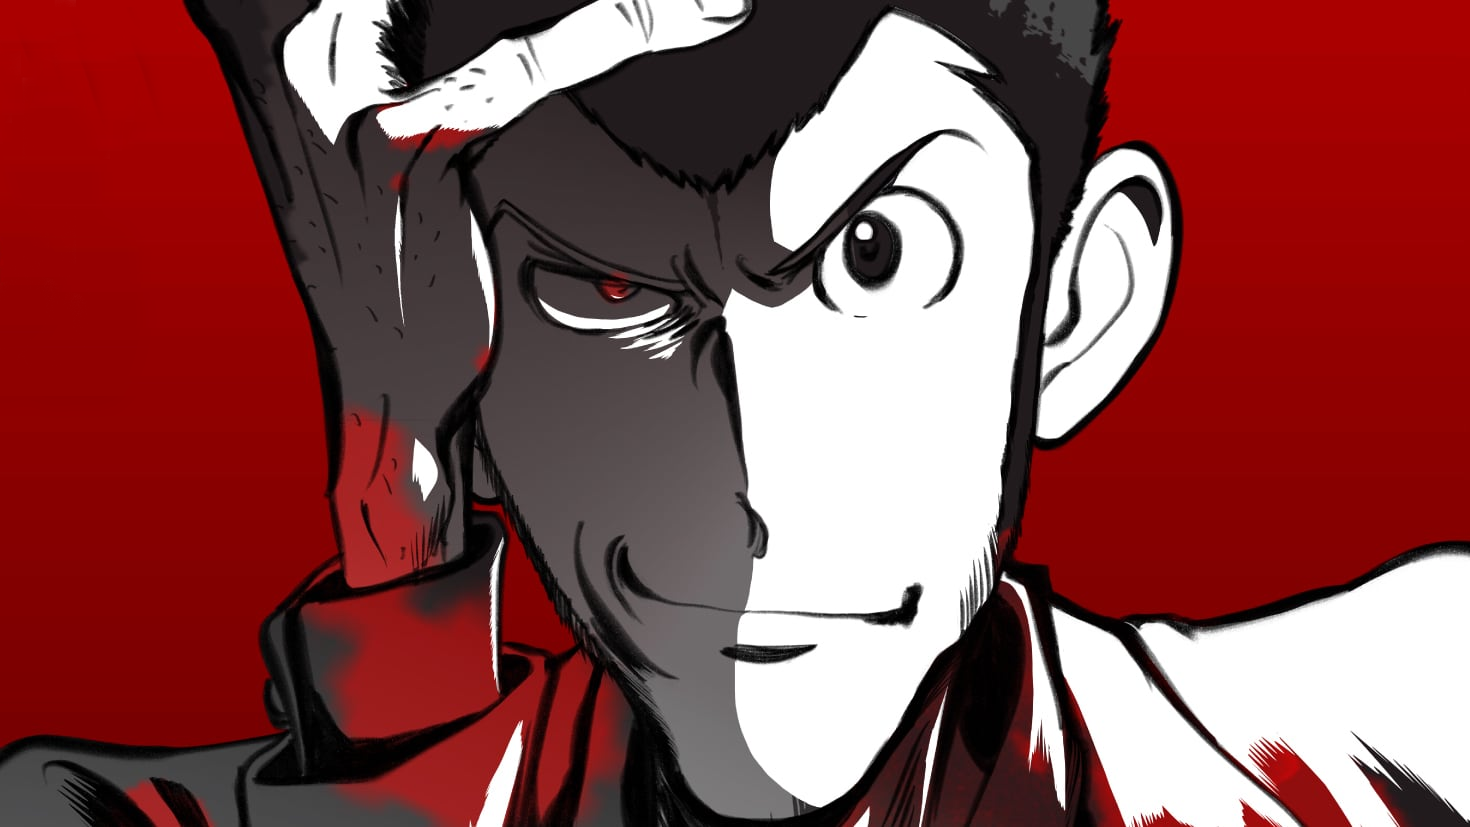 FEATURE: A Beginner's Guide to Lupin the Third